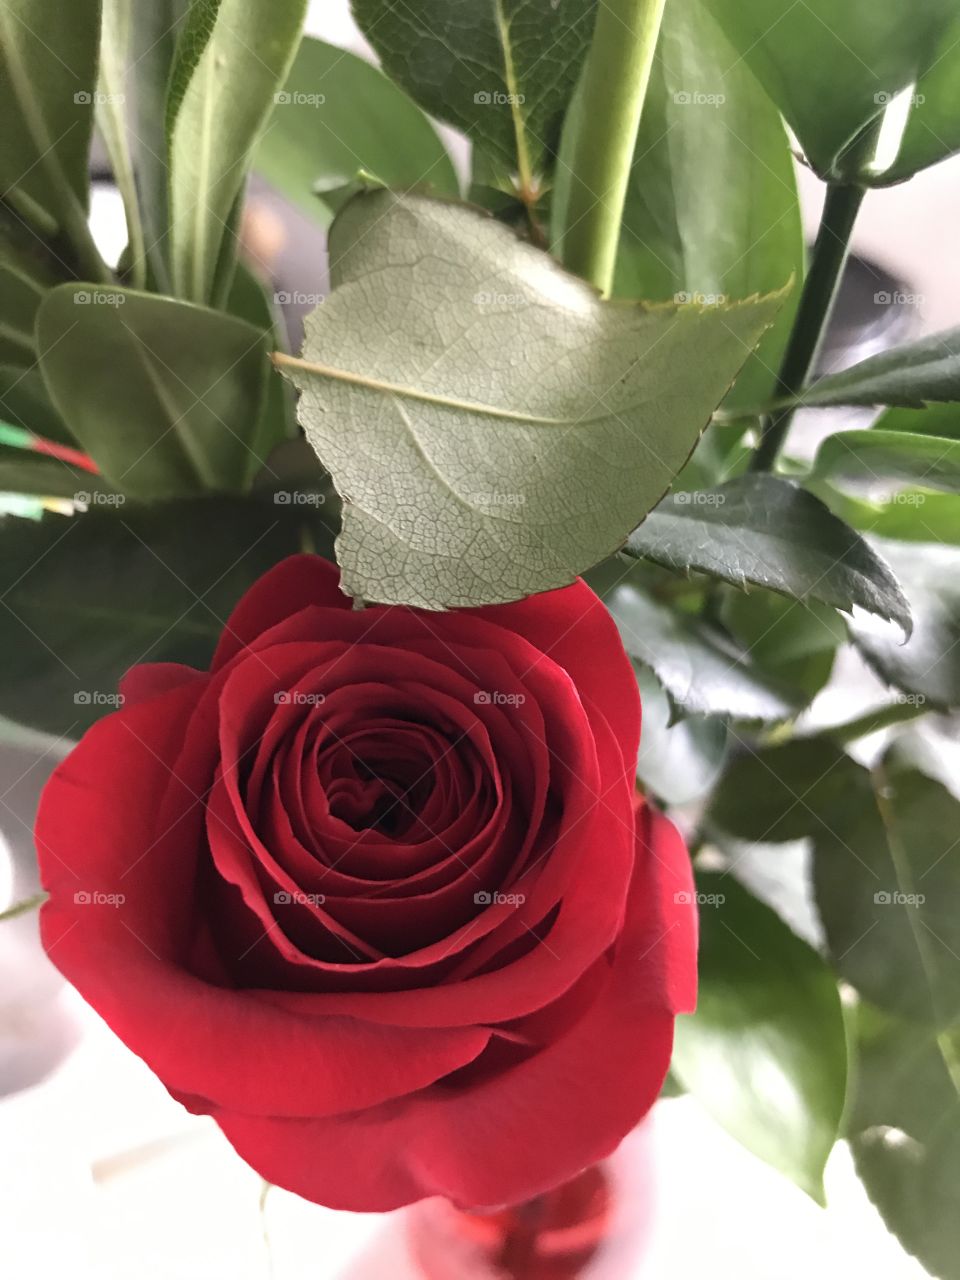 One single red rose